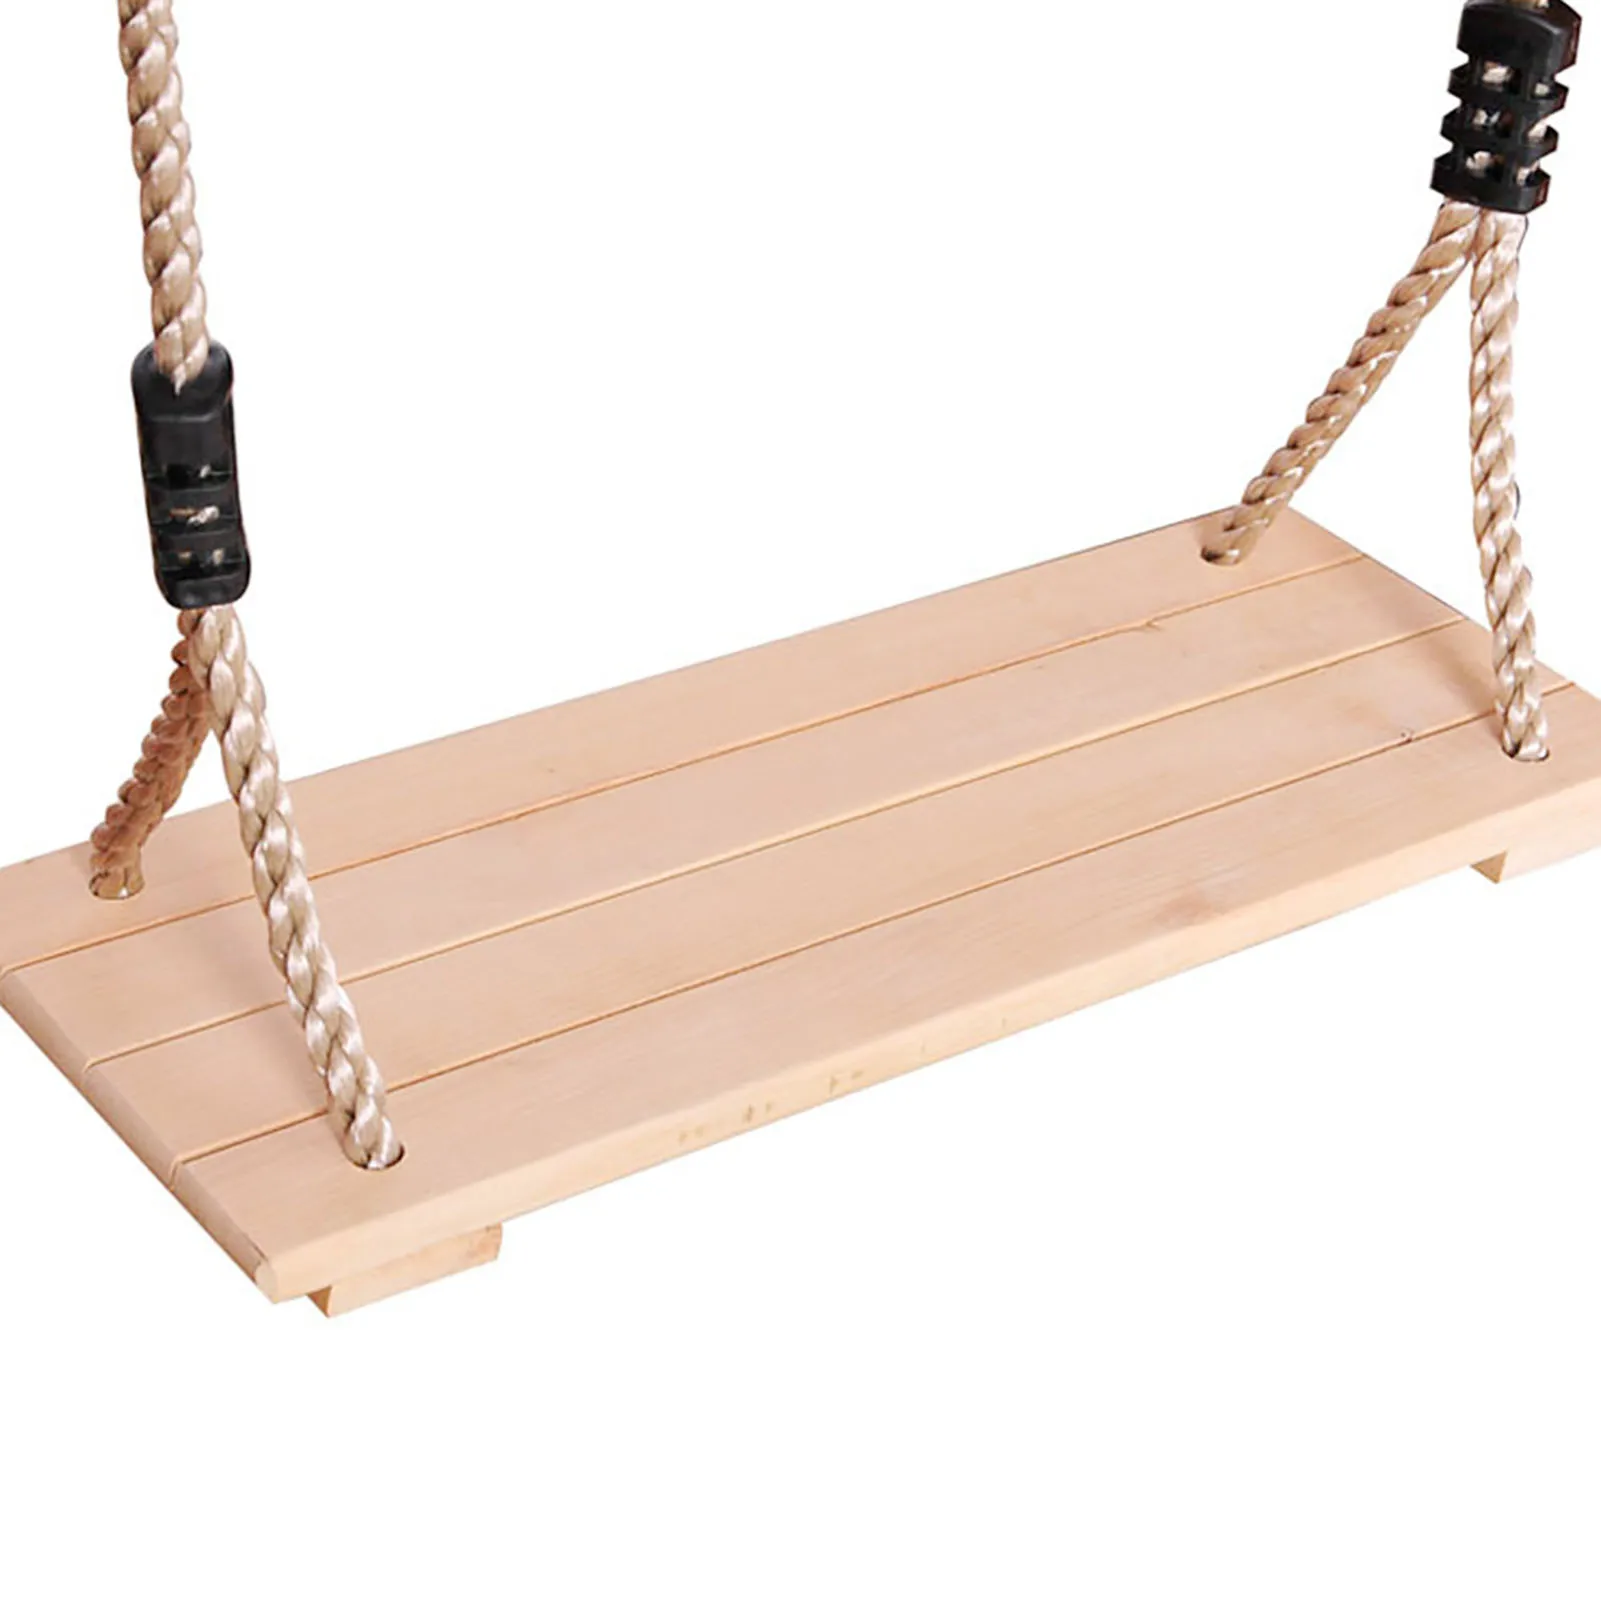 

High-Quality Polished Four-Board Anti-Corrosion Wood Swing Outdoor Indoor Pastoral Wooden Swing for Adults Children Playing